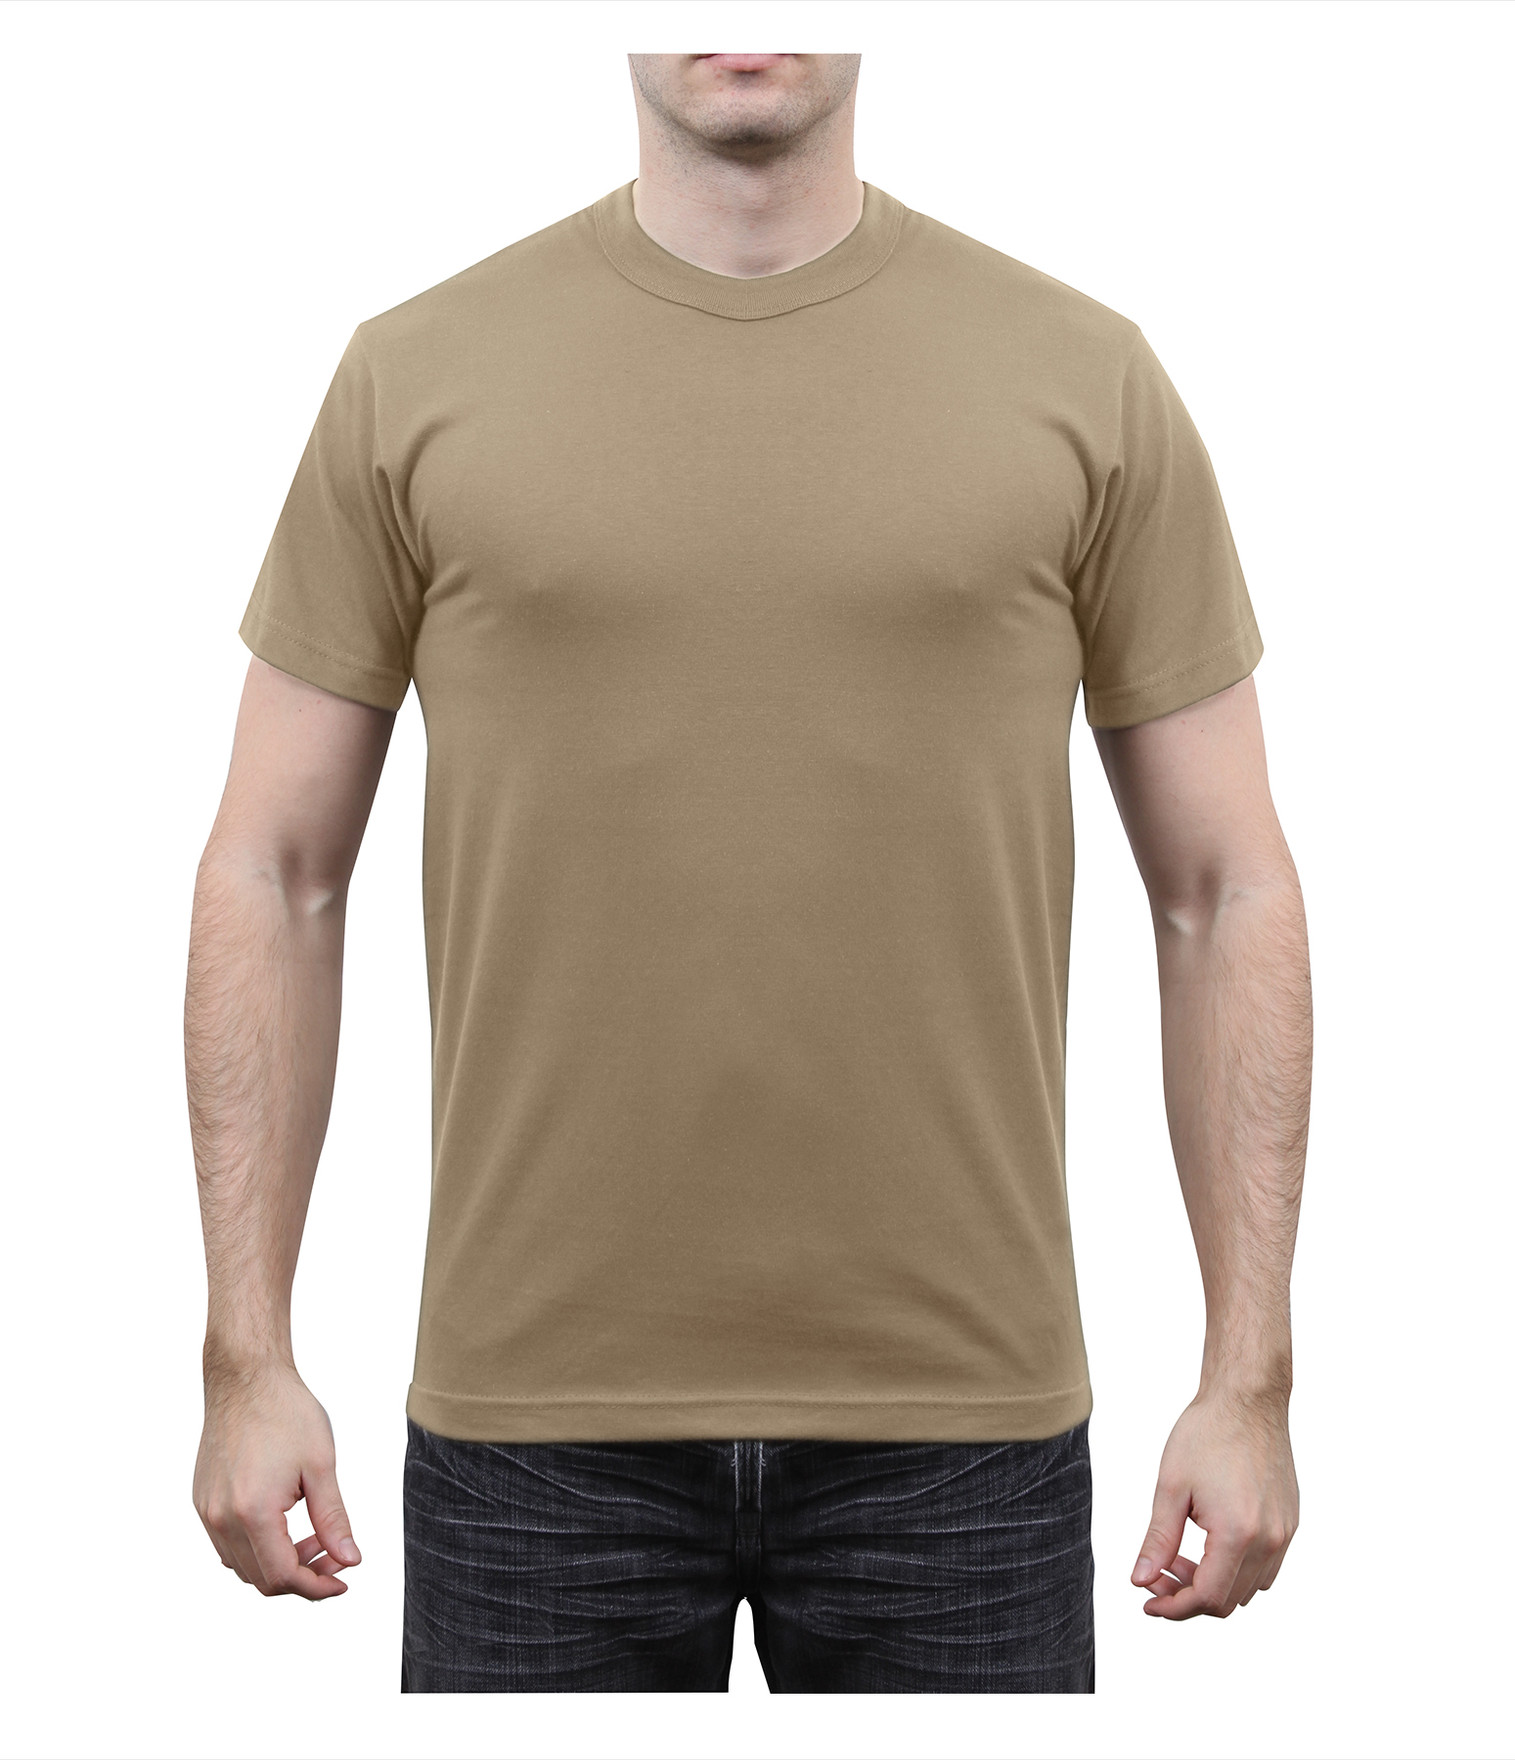 Rothco Solid Color Cotton / Polyester Blend Military T-Shirt - Khaki